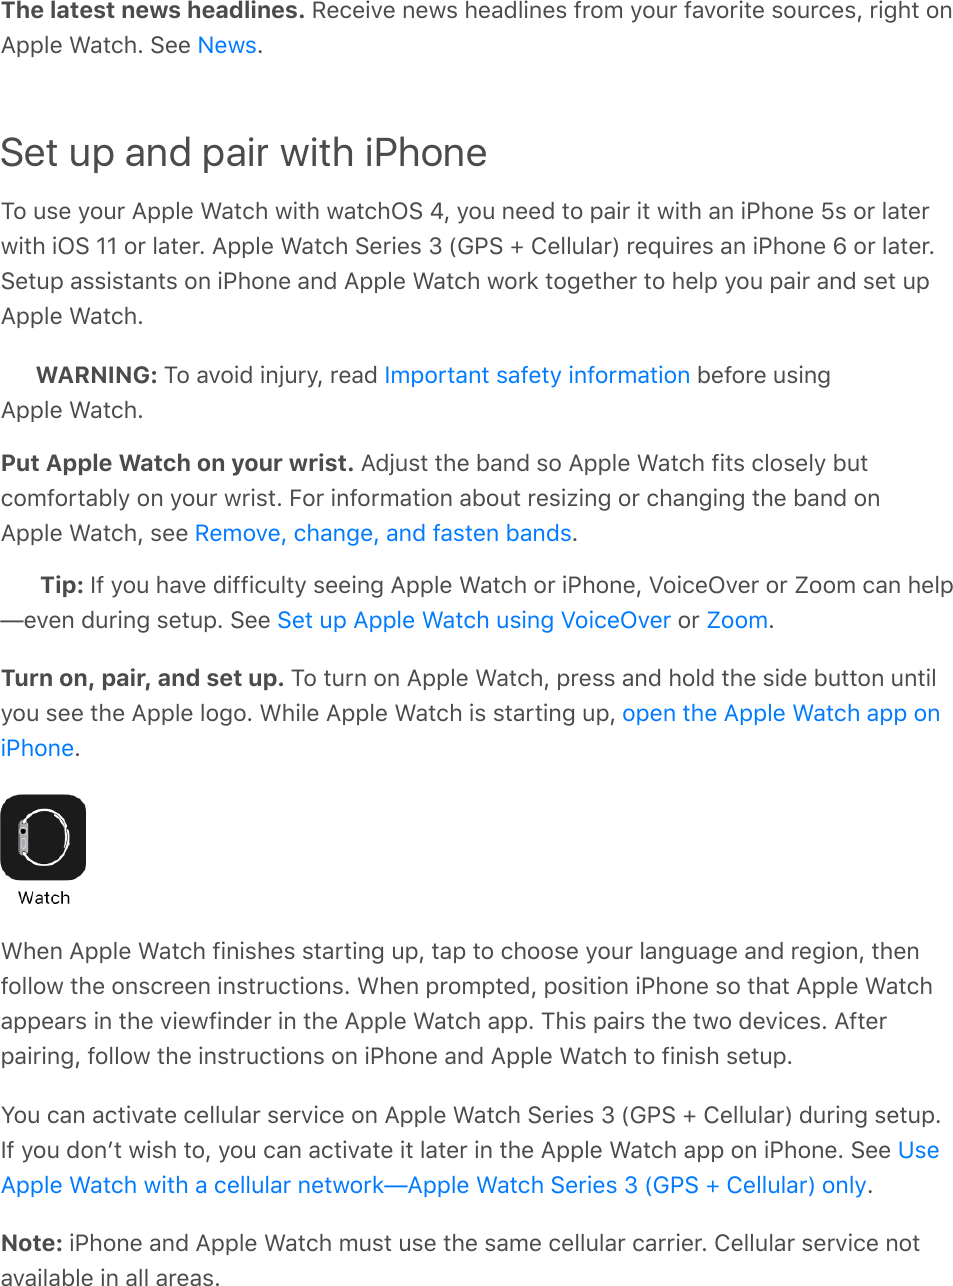 The latest news headlines. Receive news headlines from your favorite sources, right onApple Watch. See  .Set up and pair with iPhoneTo use your Apple Watch with watchOS 4, you need to pair it with an iPhone 5s or laterwith iOS 11 or later. Apple Watch Series 3 (GPS + Cellular) requires an iPhone 6 or later.Setup assistants on iPhone and Apple Watch work together to help you pair and set upApple Watch.WARNING: To avoid injury, read   before usingApple Watch.Put Apple Watch on your wrist. Adjust the band so Apple Watch fits closely butcomfortably on your wrist. For information about resizing or changing the band onApple Watch, see  .Tip: If you have difficulty seeing Apple Watch or iPhone, VoiceOver or Zoom can help—even during setup. See   or  .Turn on, pair, and set up. To turn on Apple Watch, press and hold the side button untilyou see the Apple logo. While Apple Watch is starting up, .When Apple Watch finishes starting up, tap to choose your language and region, thenfollow the onscreen instructions. When prompted, position iPhone so that Apple Watchappears in the viewfinder in the Apple Watch app. This pairs the two devices. Afterpairing, follow the instructions on iPhone and Apple Watch to finish setup.You can activate cellular service on Apple Watch Series 3 (GPS + Cellular) during setup.If you donʼt wish to, you can activate it later in the Apple Watch app on iPhone. See .Note: iPhone and Apple Watch must use the same cellular carrier. Cellular service notavailable in all areas.NewsImportant safety informationRemove, change, and fasten bandsSet up Apple Watch using VoiceOver Zoomopen the Apple Watch app oniPhoneUseApple Watch with a cellular network—Apple Watch Series 3 (GPS + Cellular) only